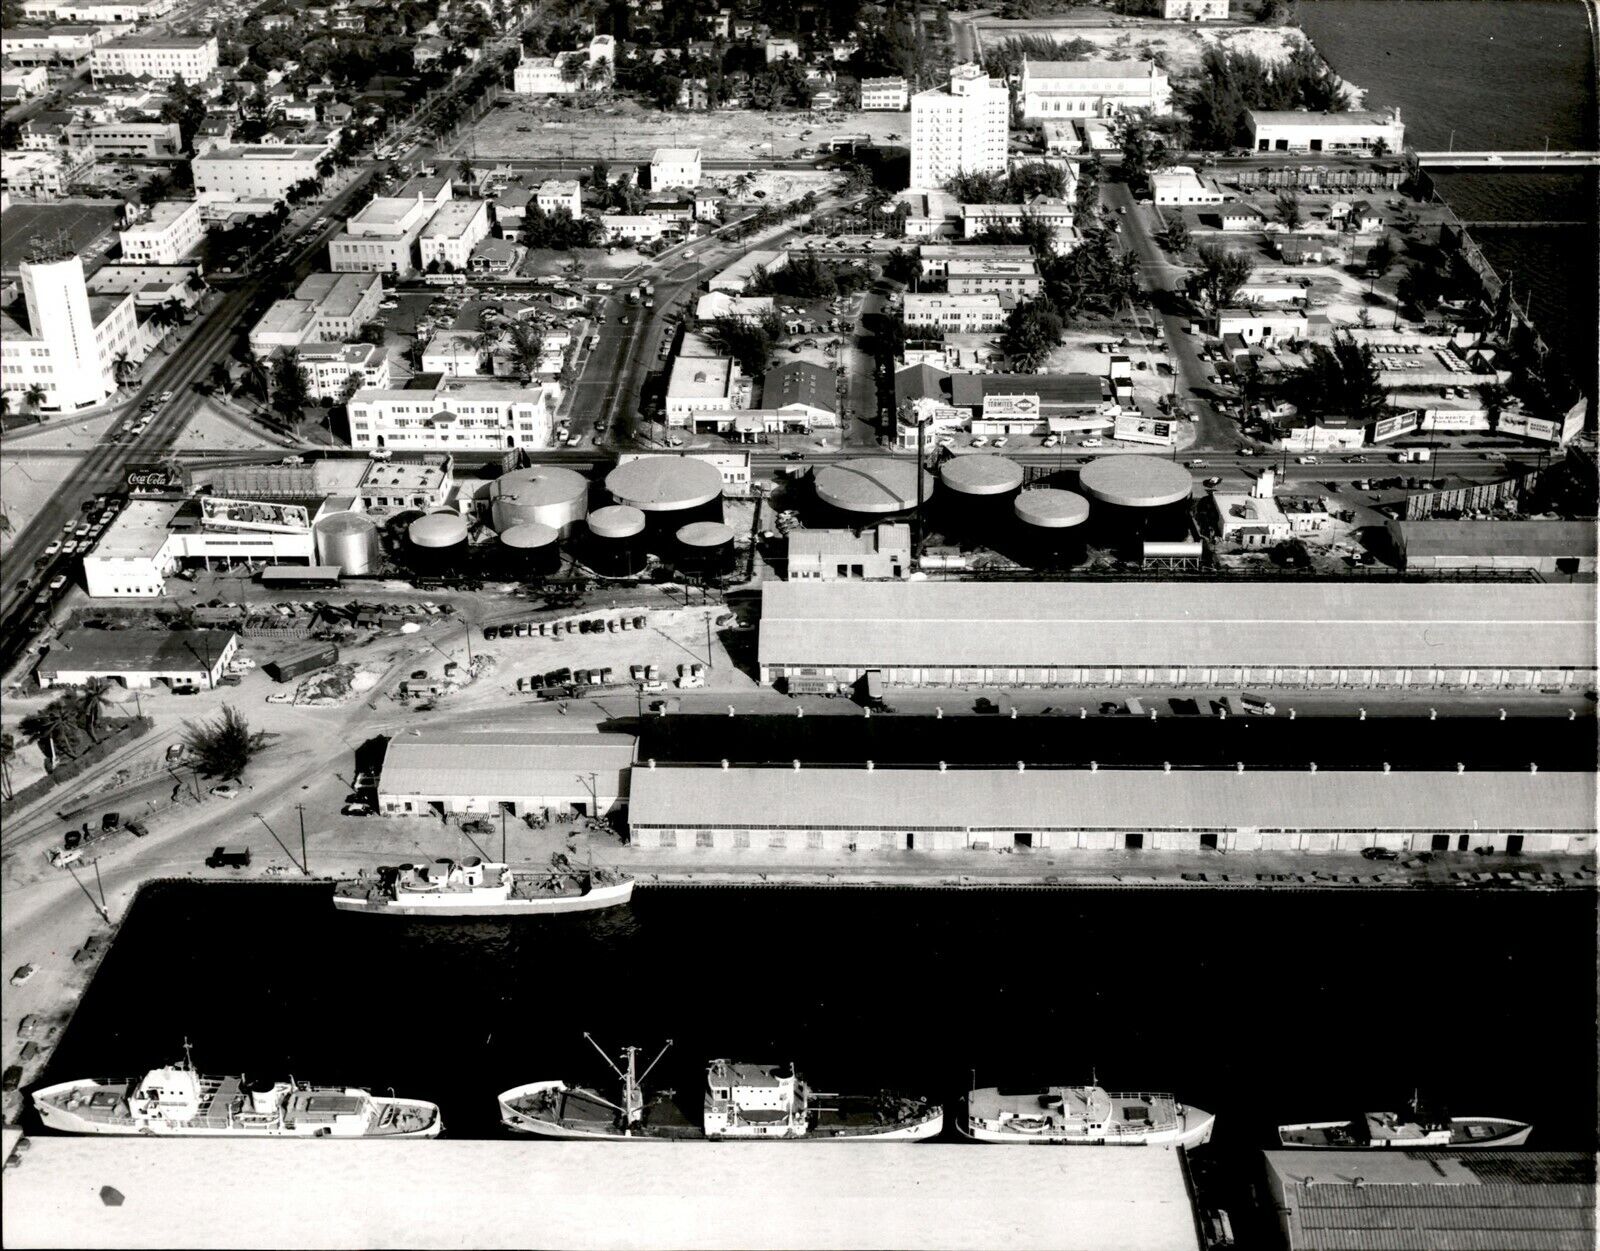 LG904 1954 Orig John Walther Photo COMMERCIAL DOCKS Belcher Oil Co Aerial View